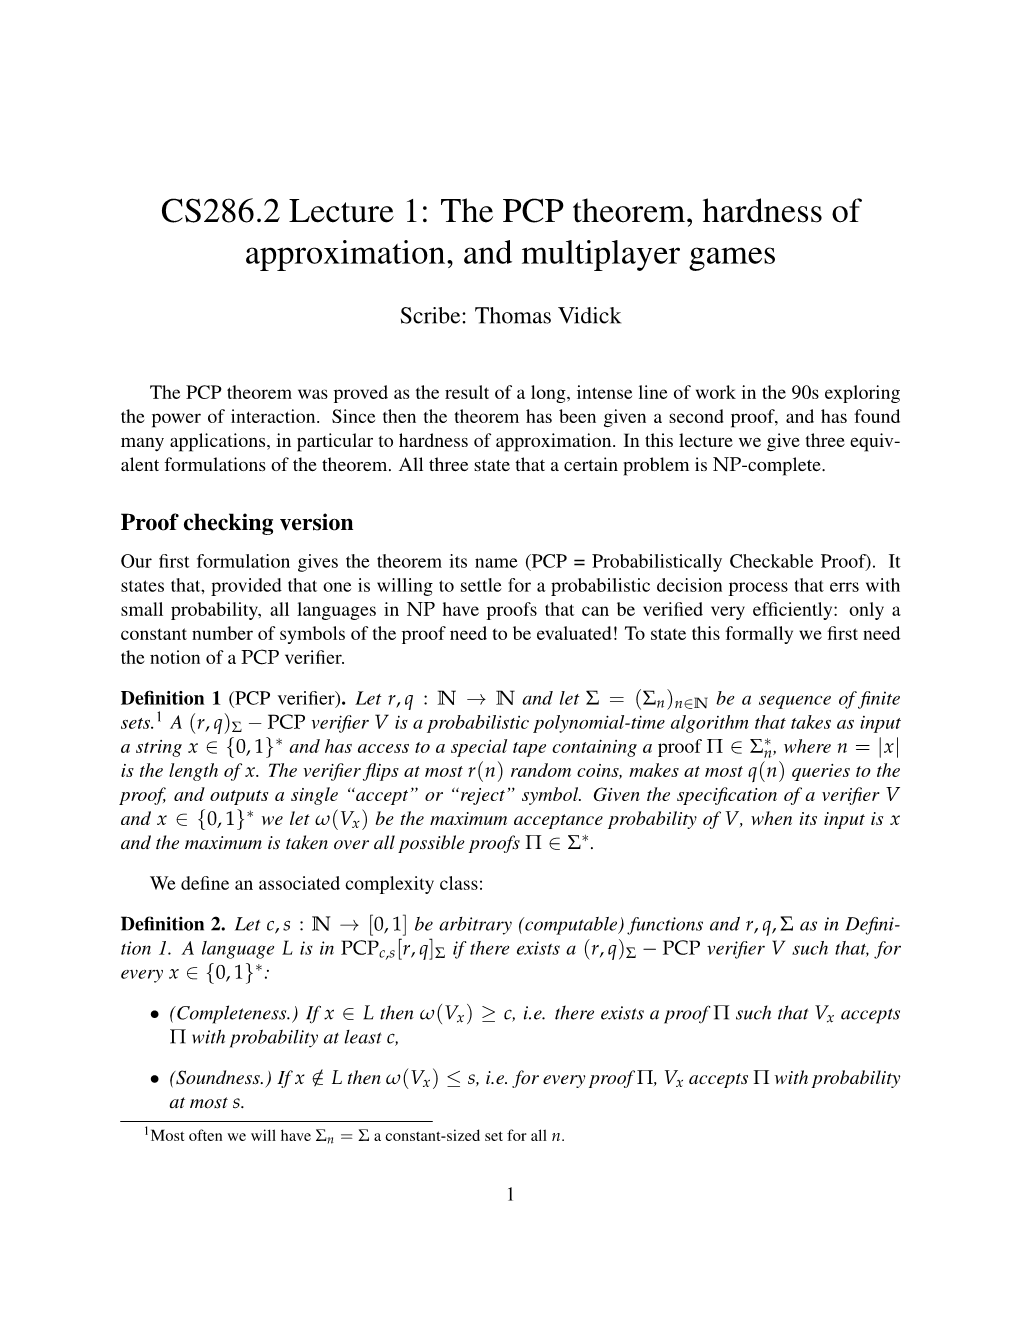 CS286.2 Lecture 1: the PCP Theorem, Hardness of Approximation, and Multiplayer Games